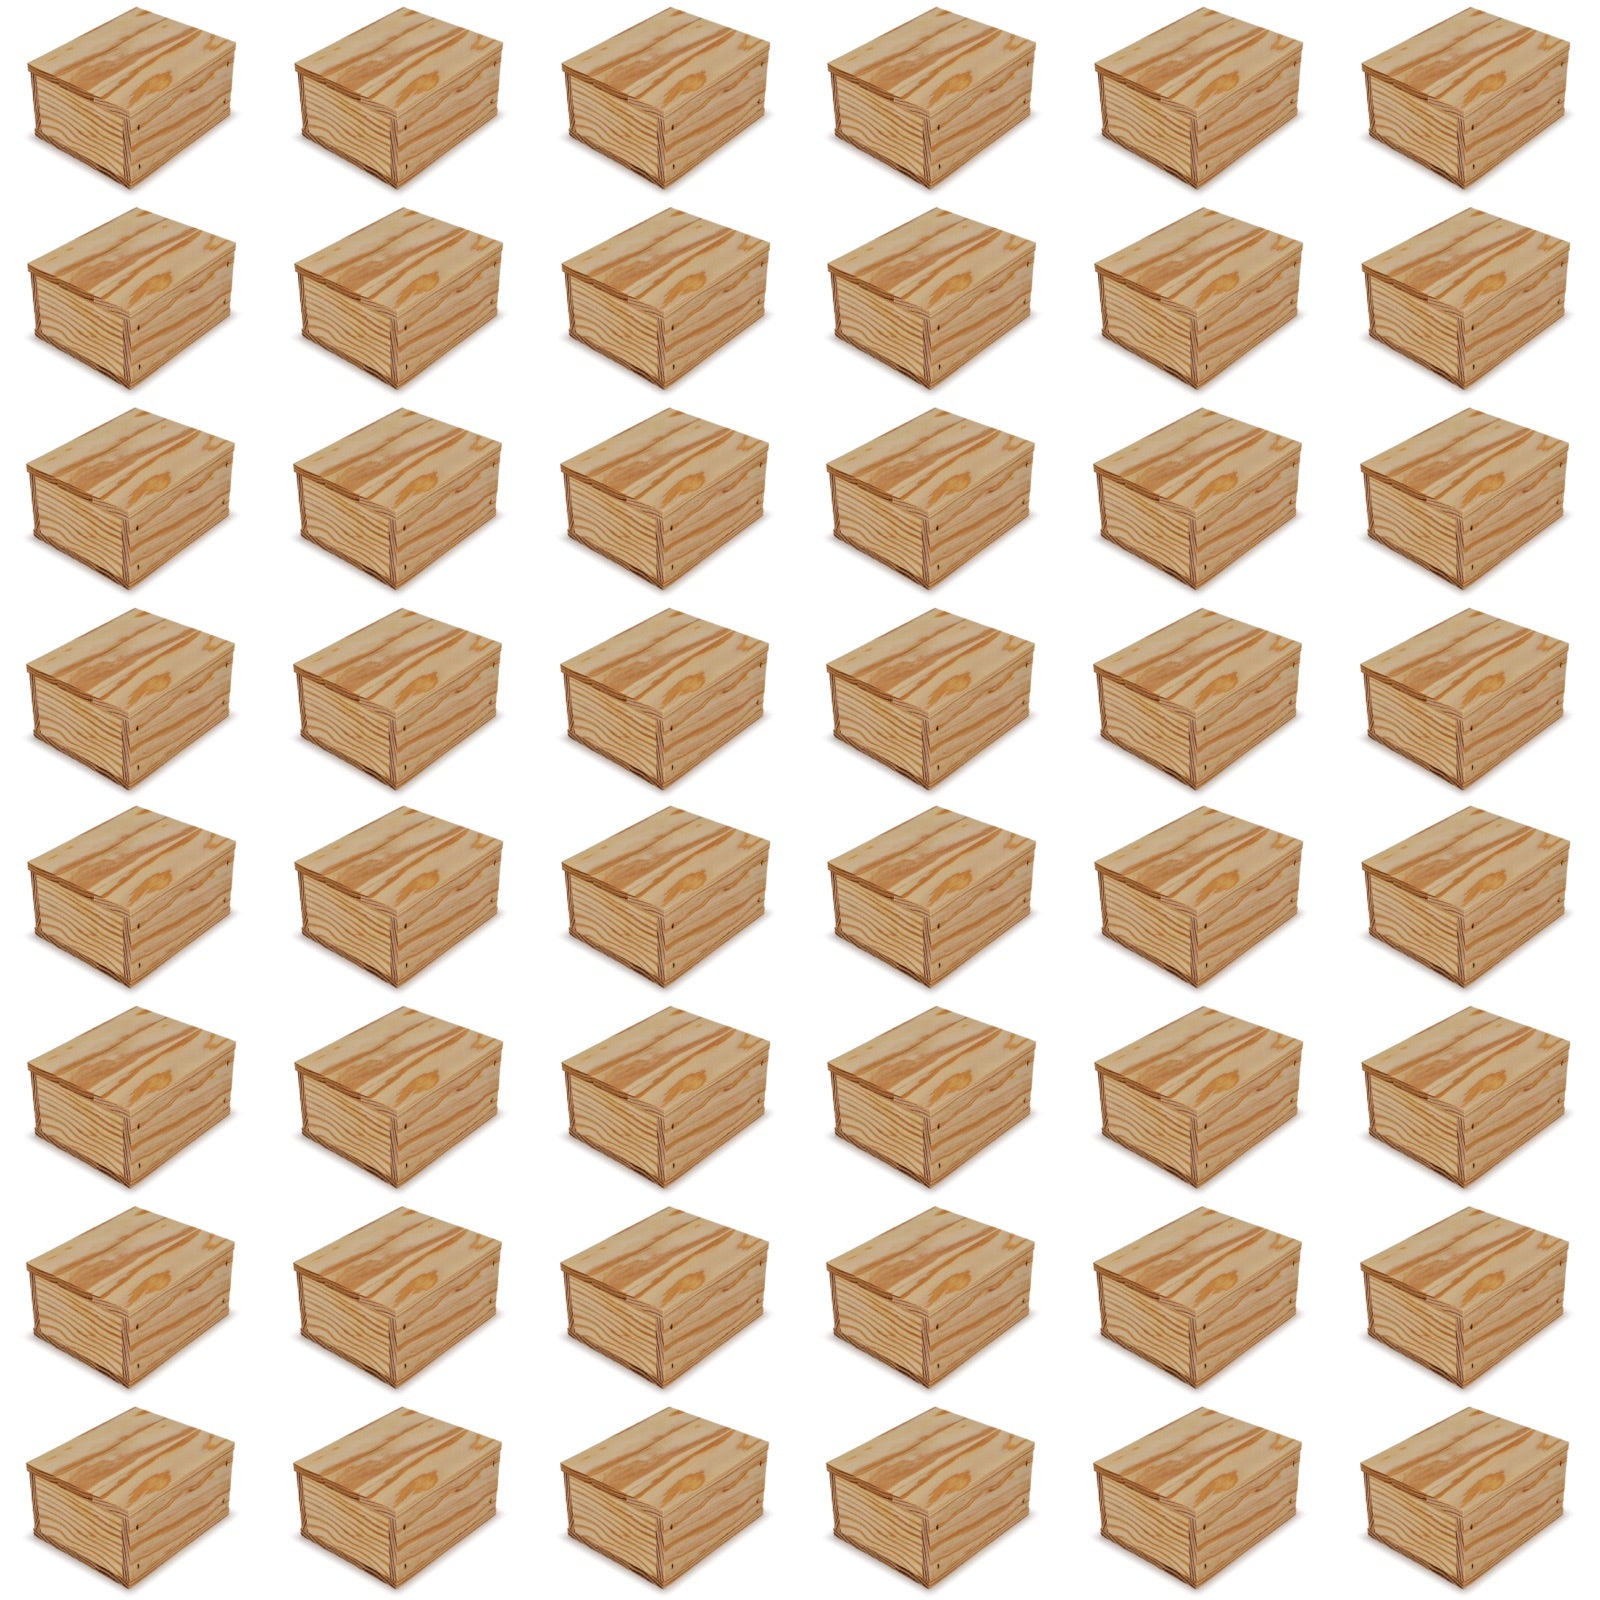 48 Small wooden crates with lid 5x4.5x2.75